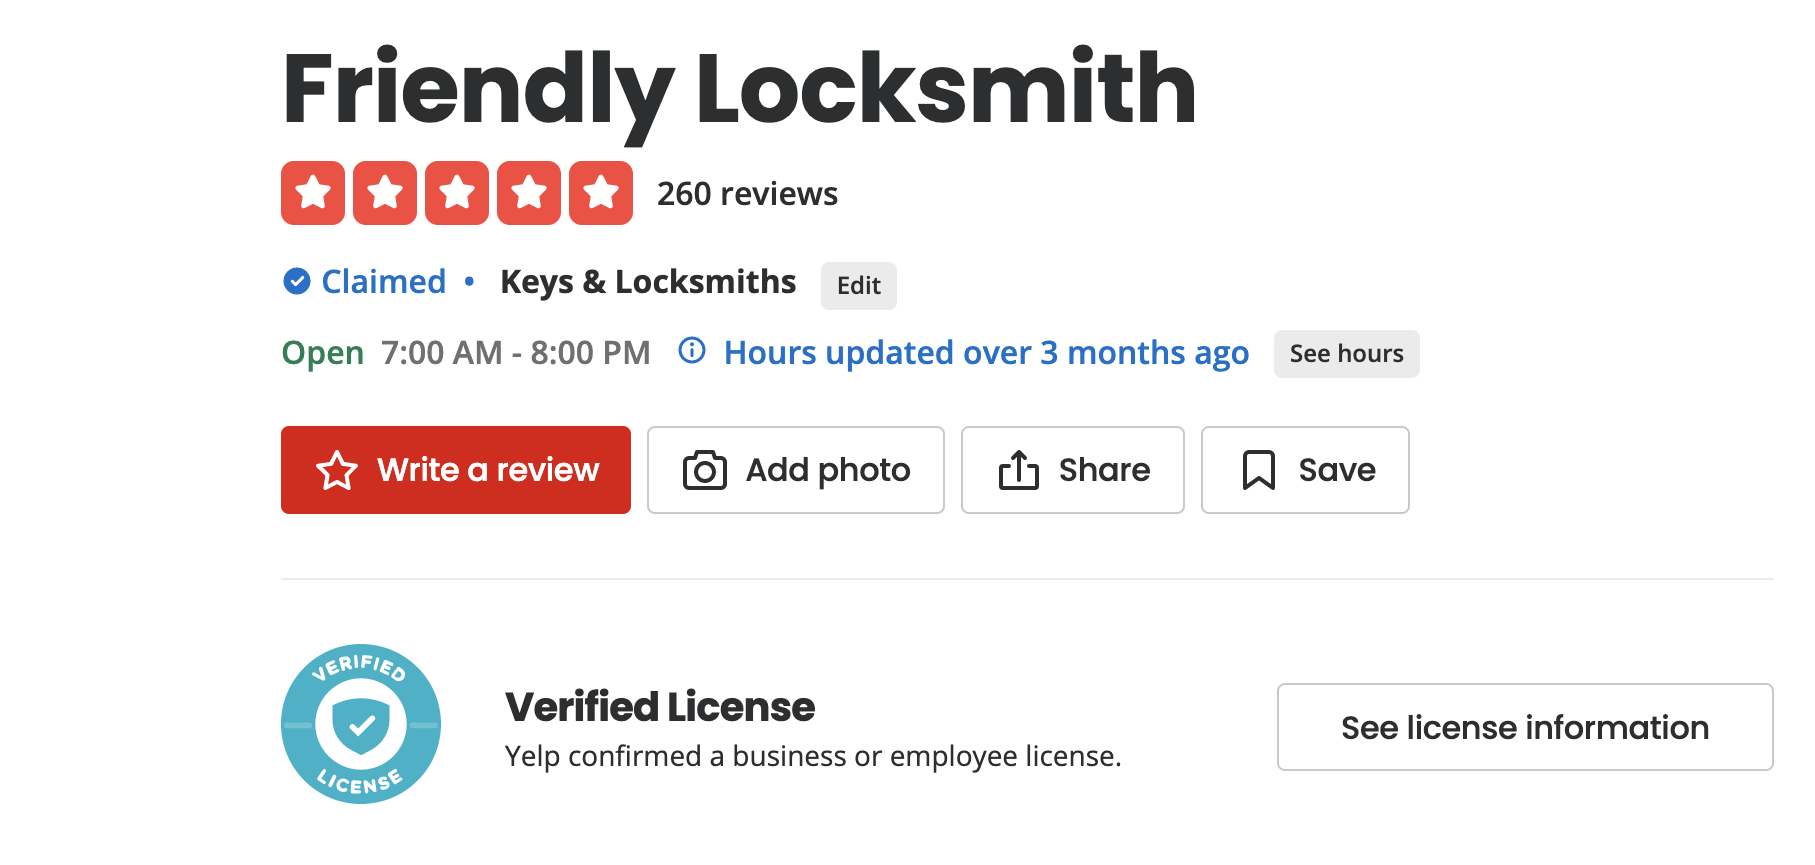 Friendly Locksmith Is Number One On Yelp